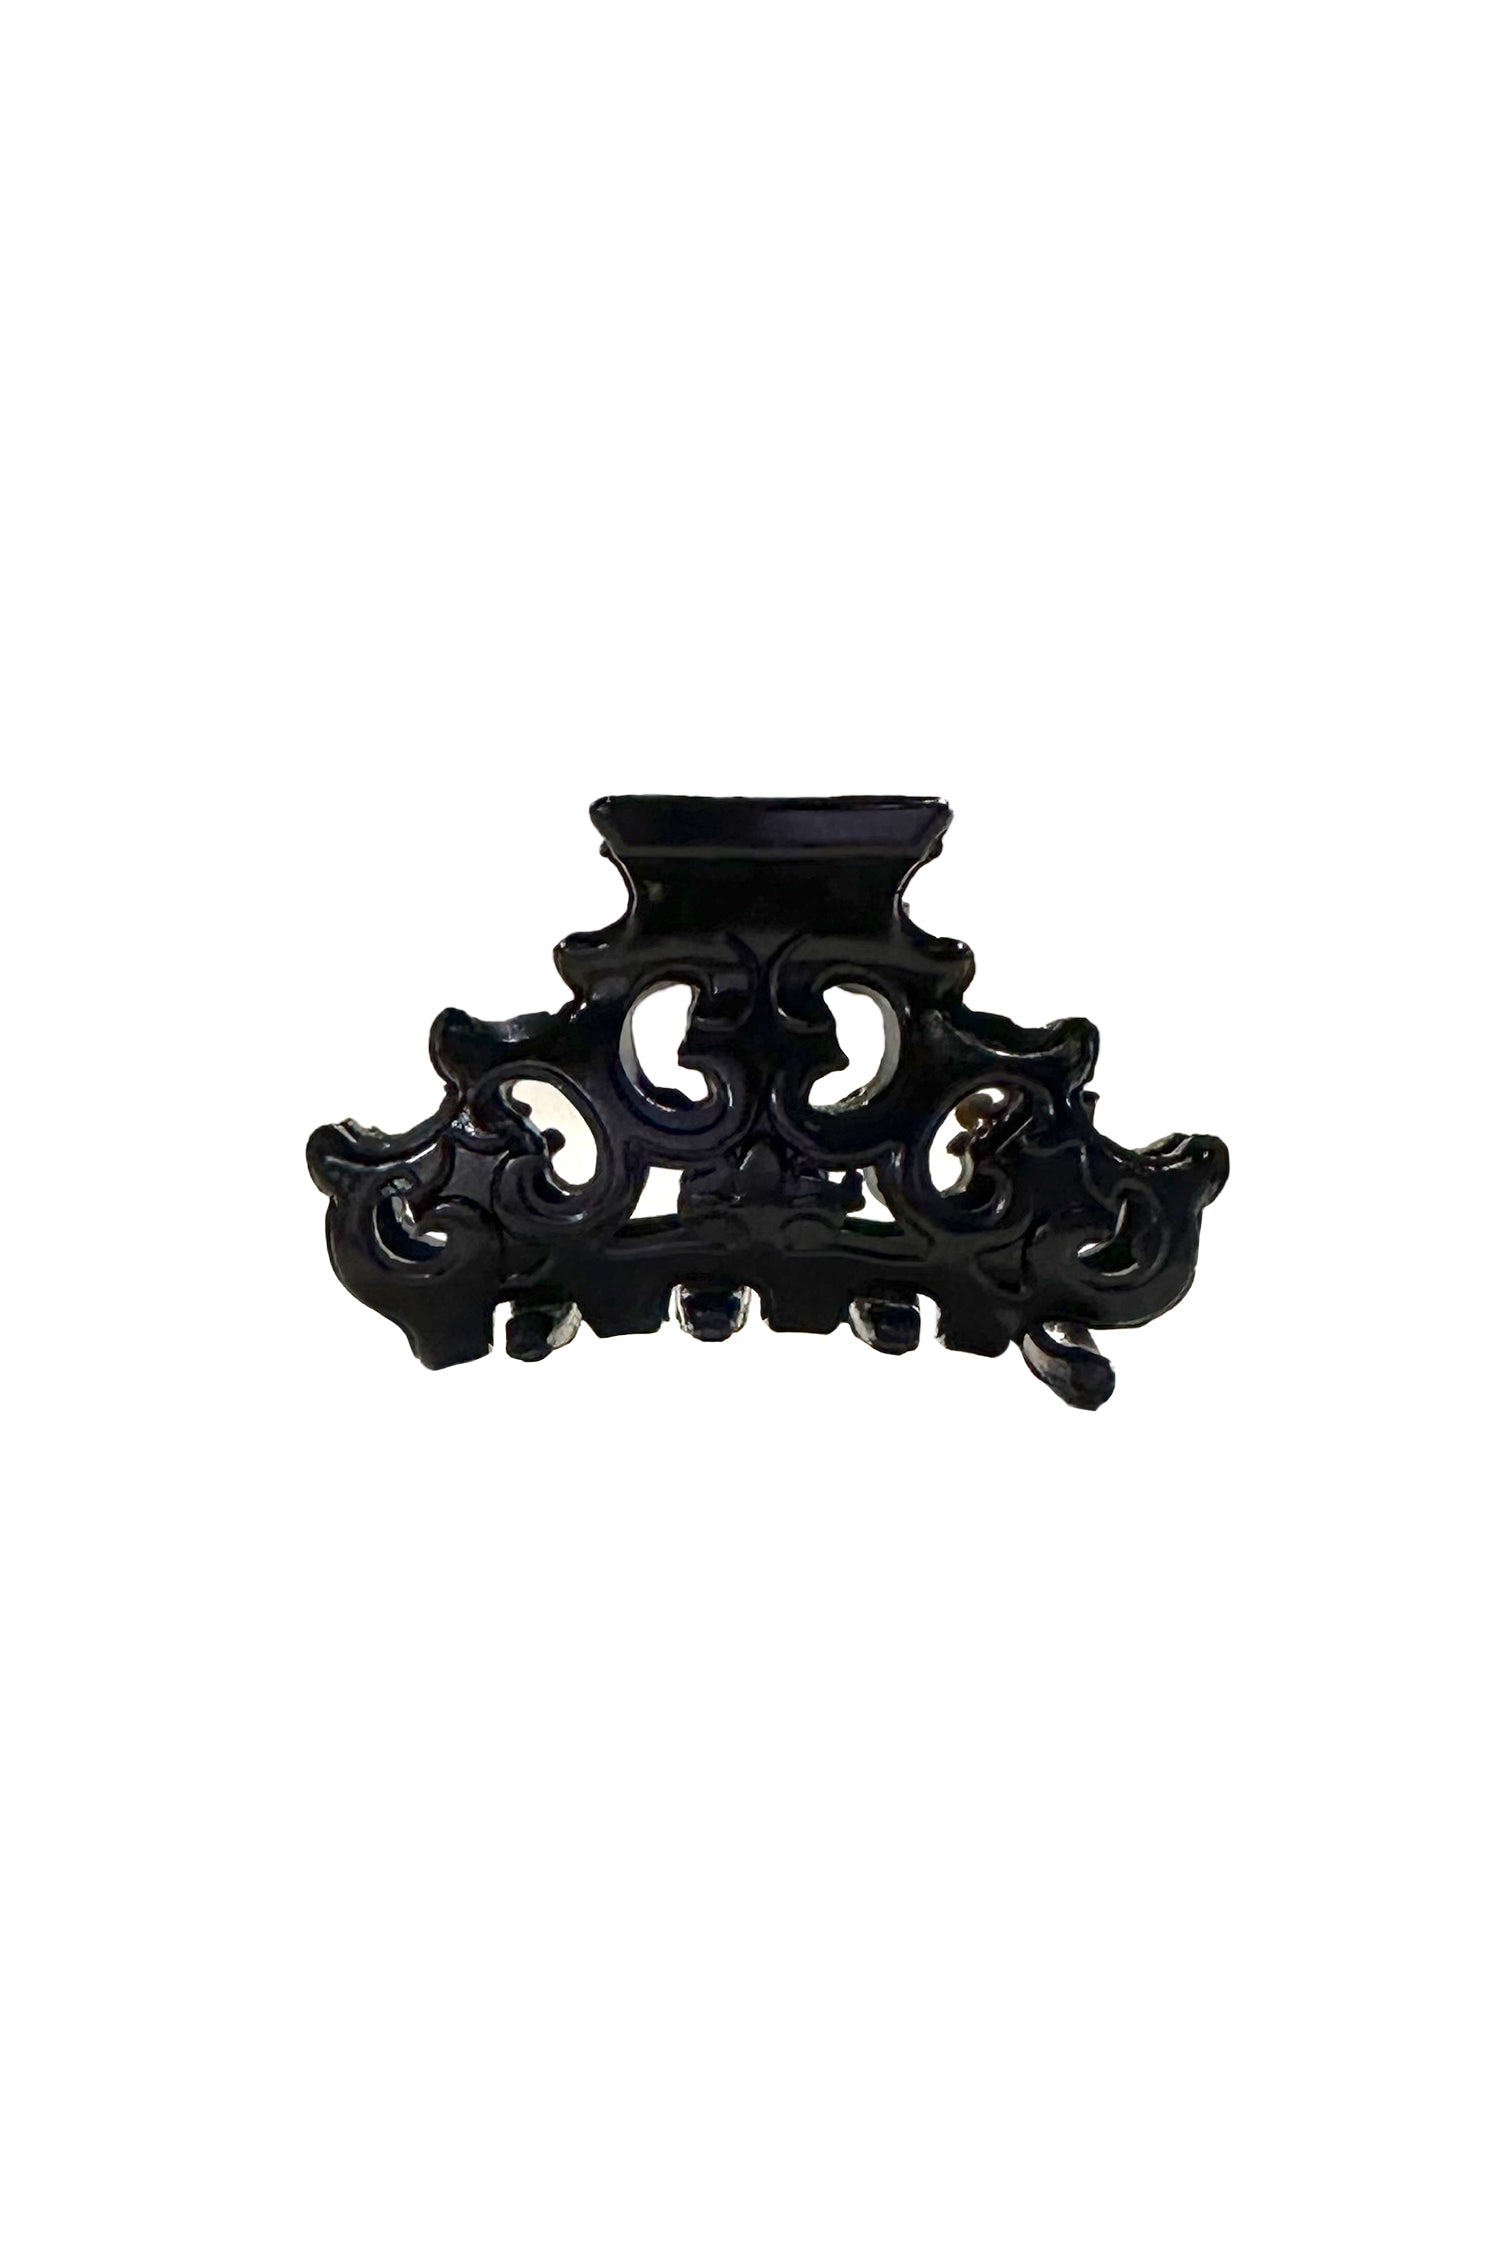 Mini Medieval French Jaw Clip, Cast iron fence ornament style in a triangle shape, top open the jaw